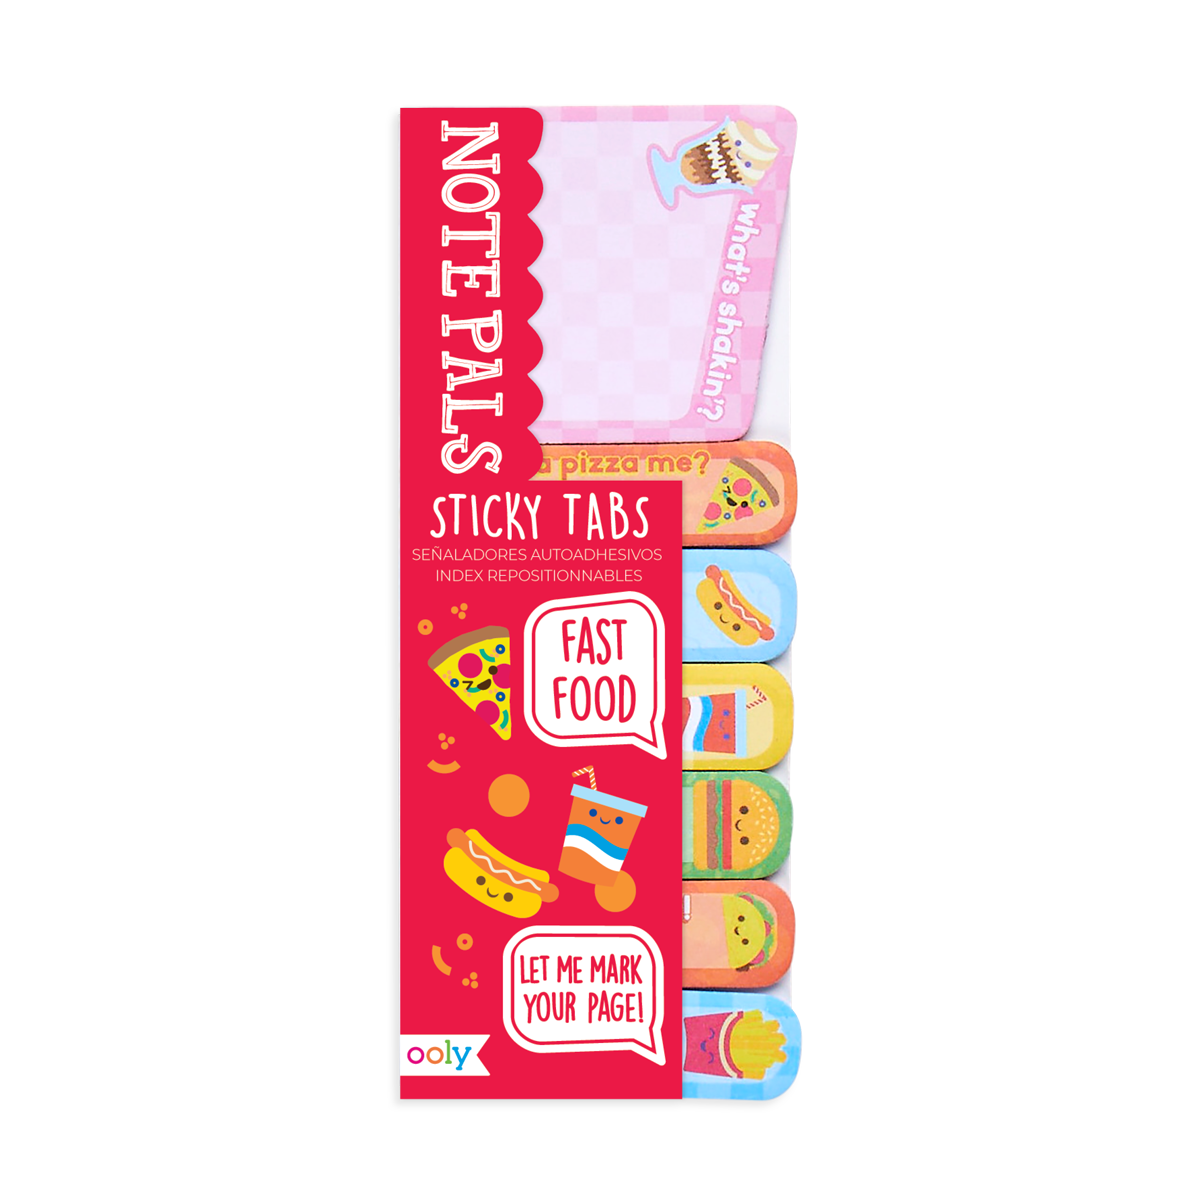 OOLY Note Pals Sticky Tabs - Fast Food in packaging